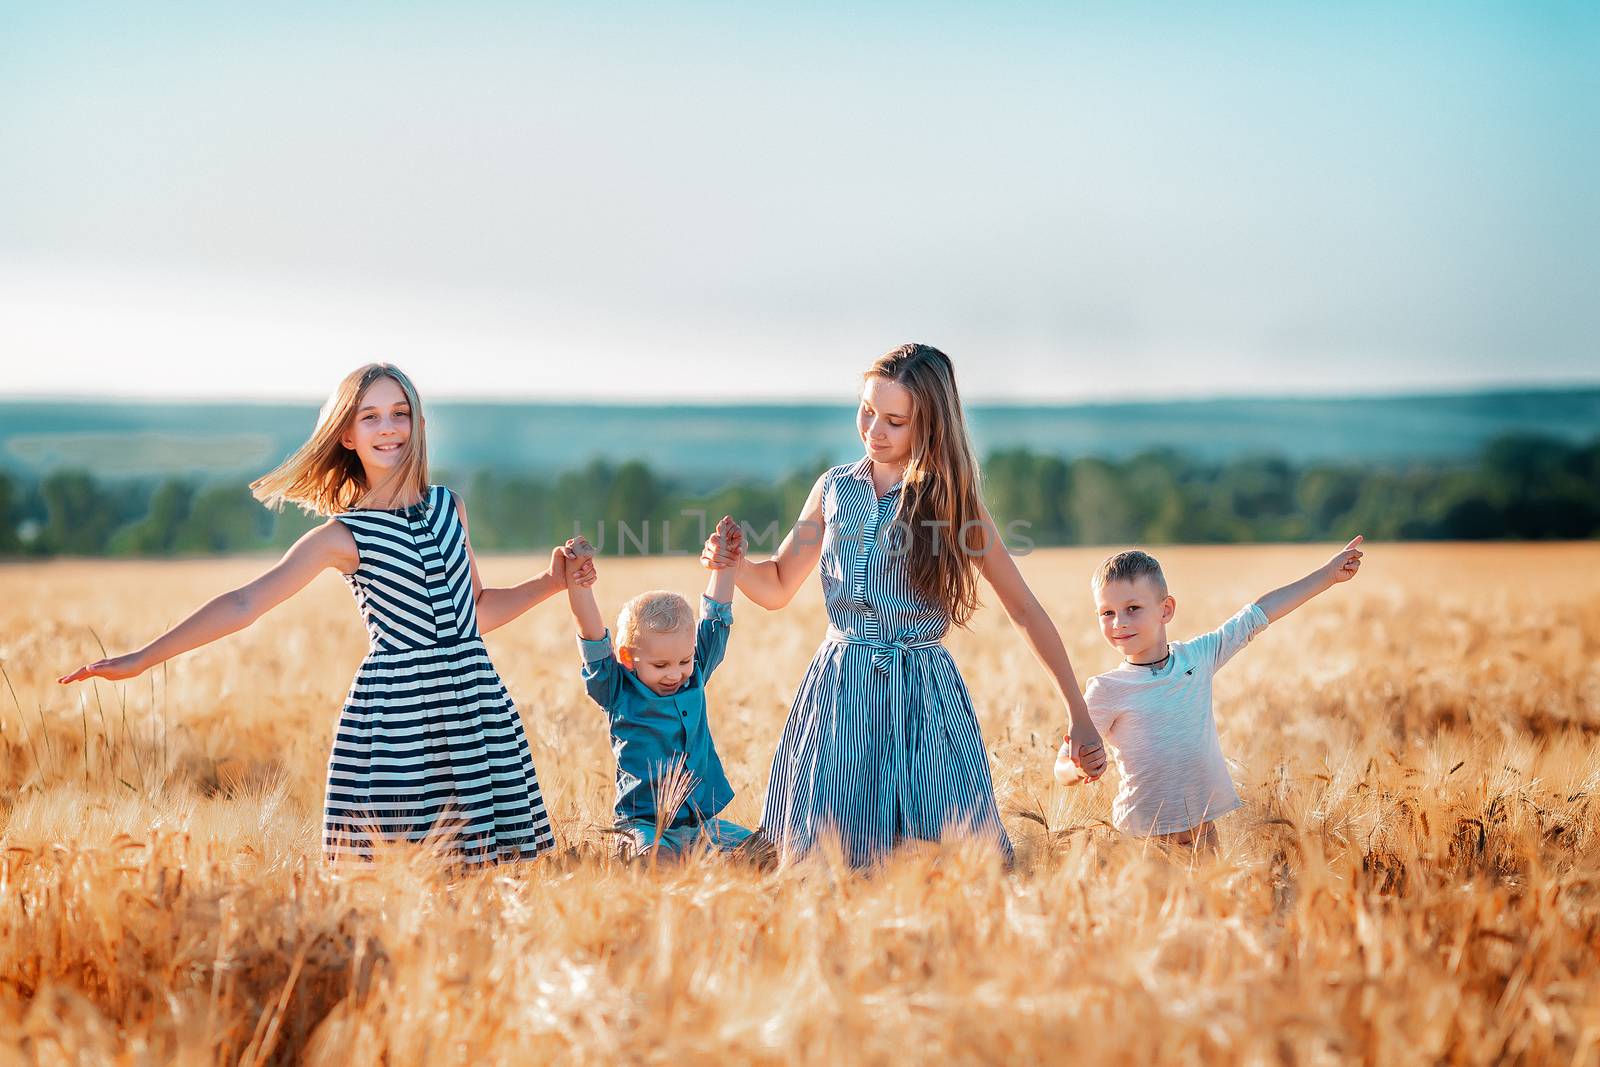 Happy kids having fun in golden wheat field at the sunset